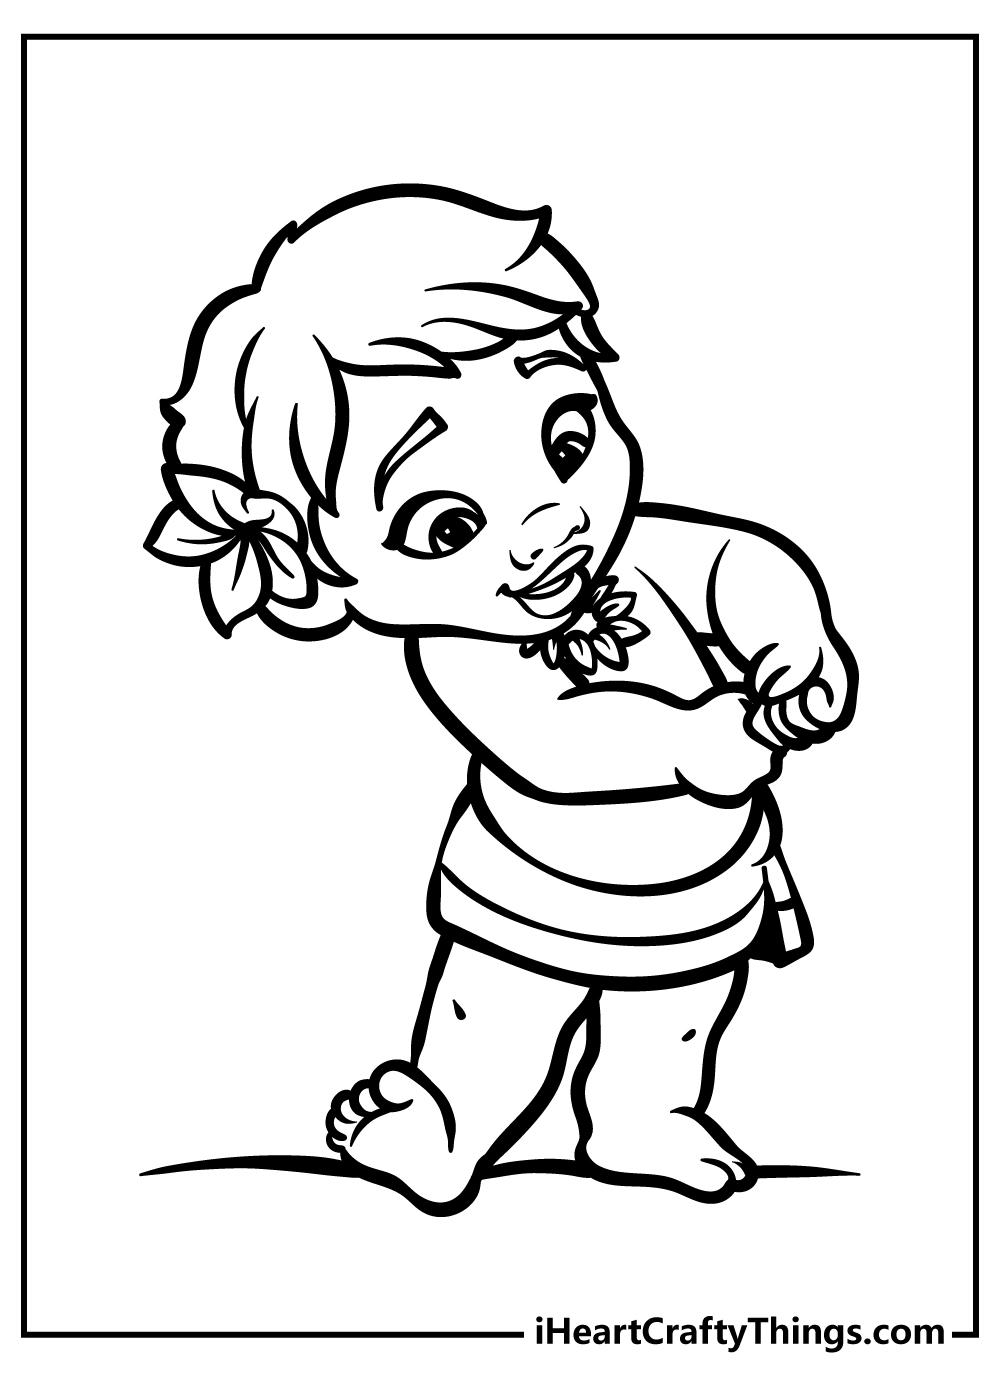 Moana coloring pages free printables